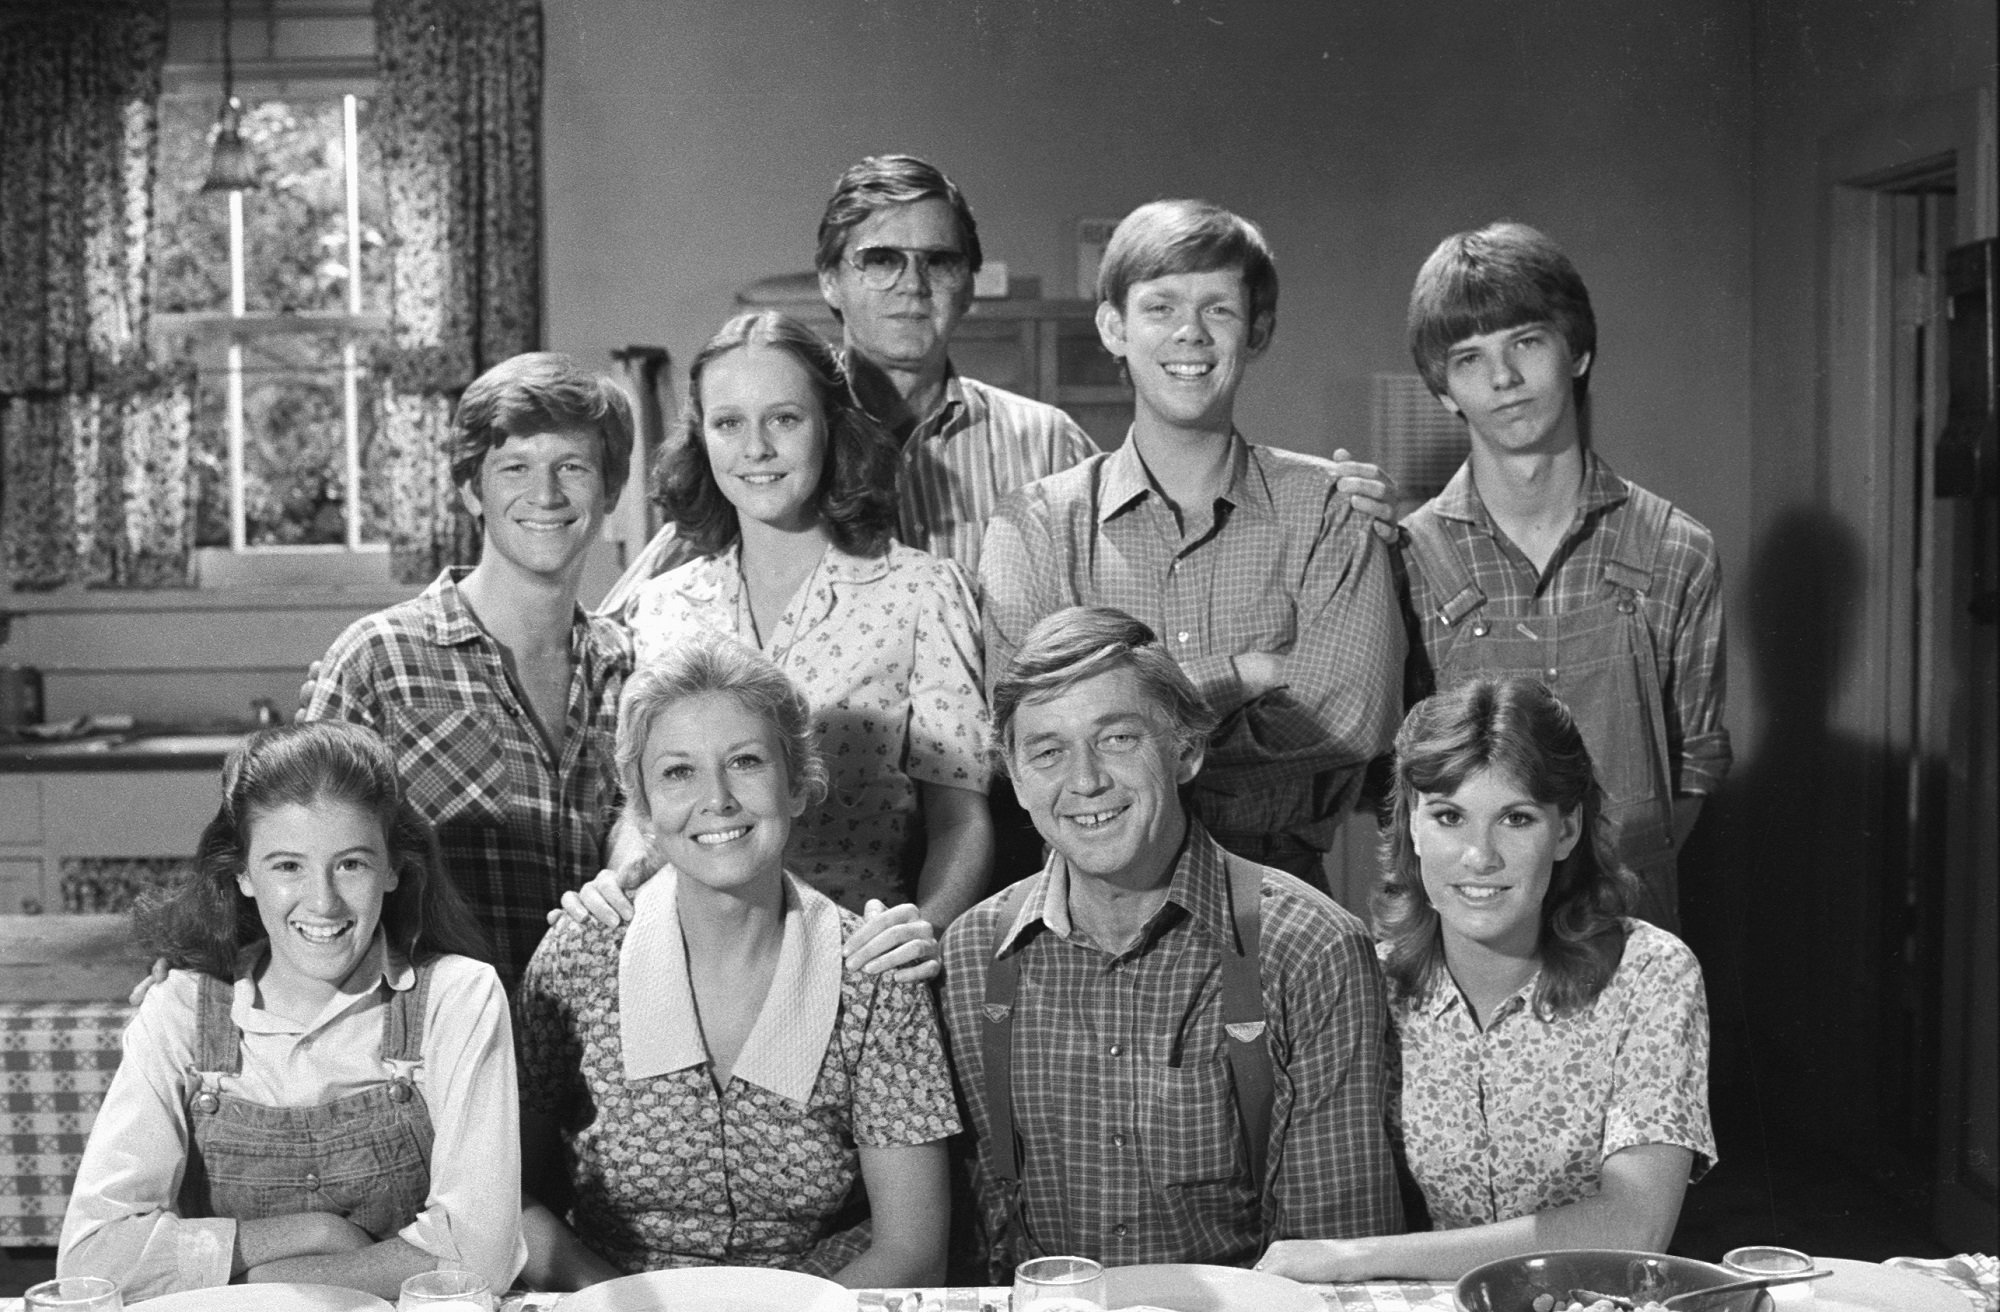 #39 The Waltons #39 Cast Members Got Burned Filming the House Fire Episode